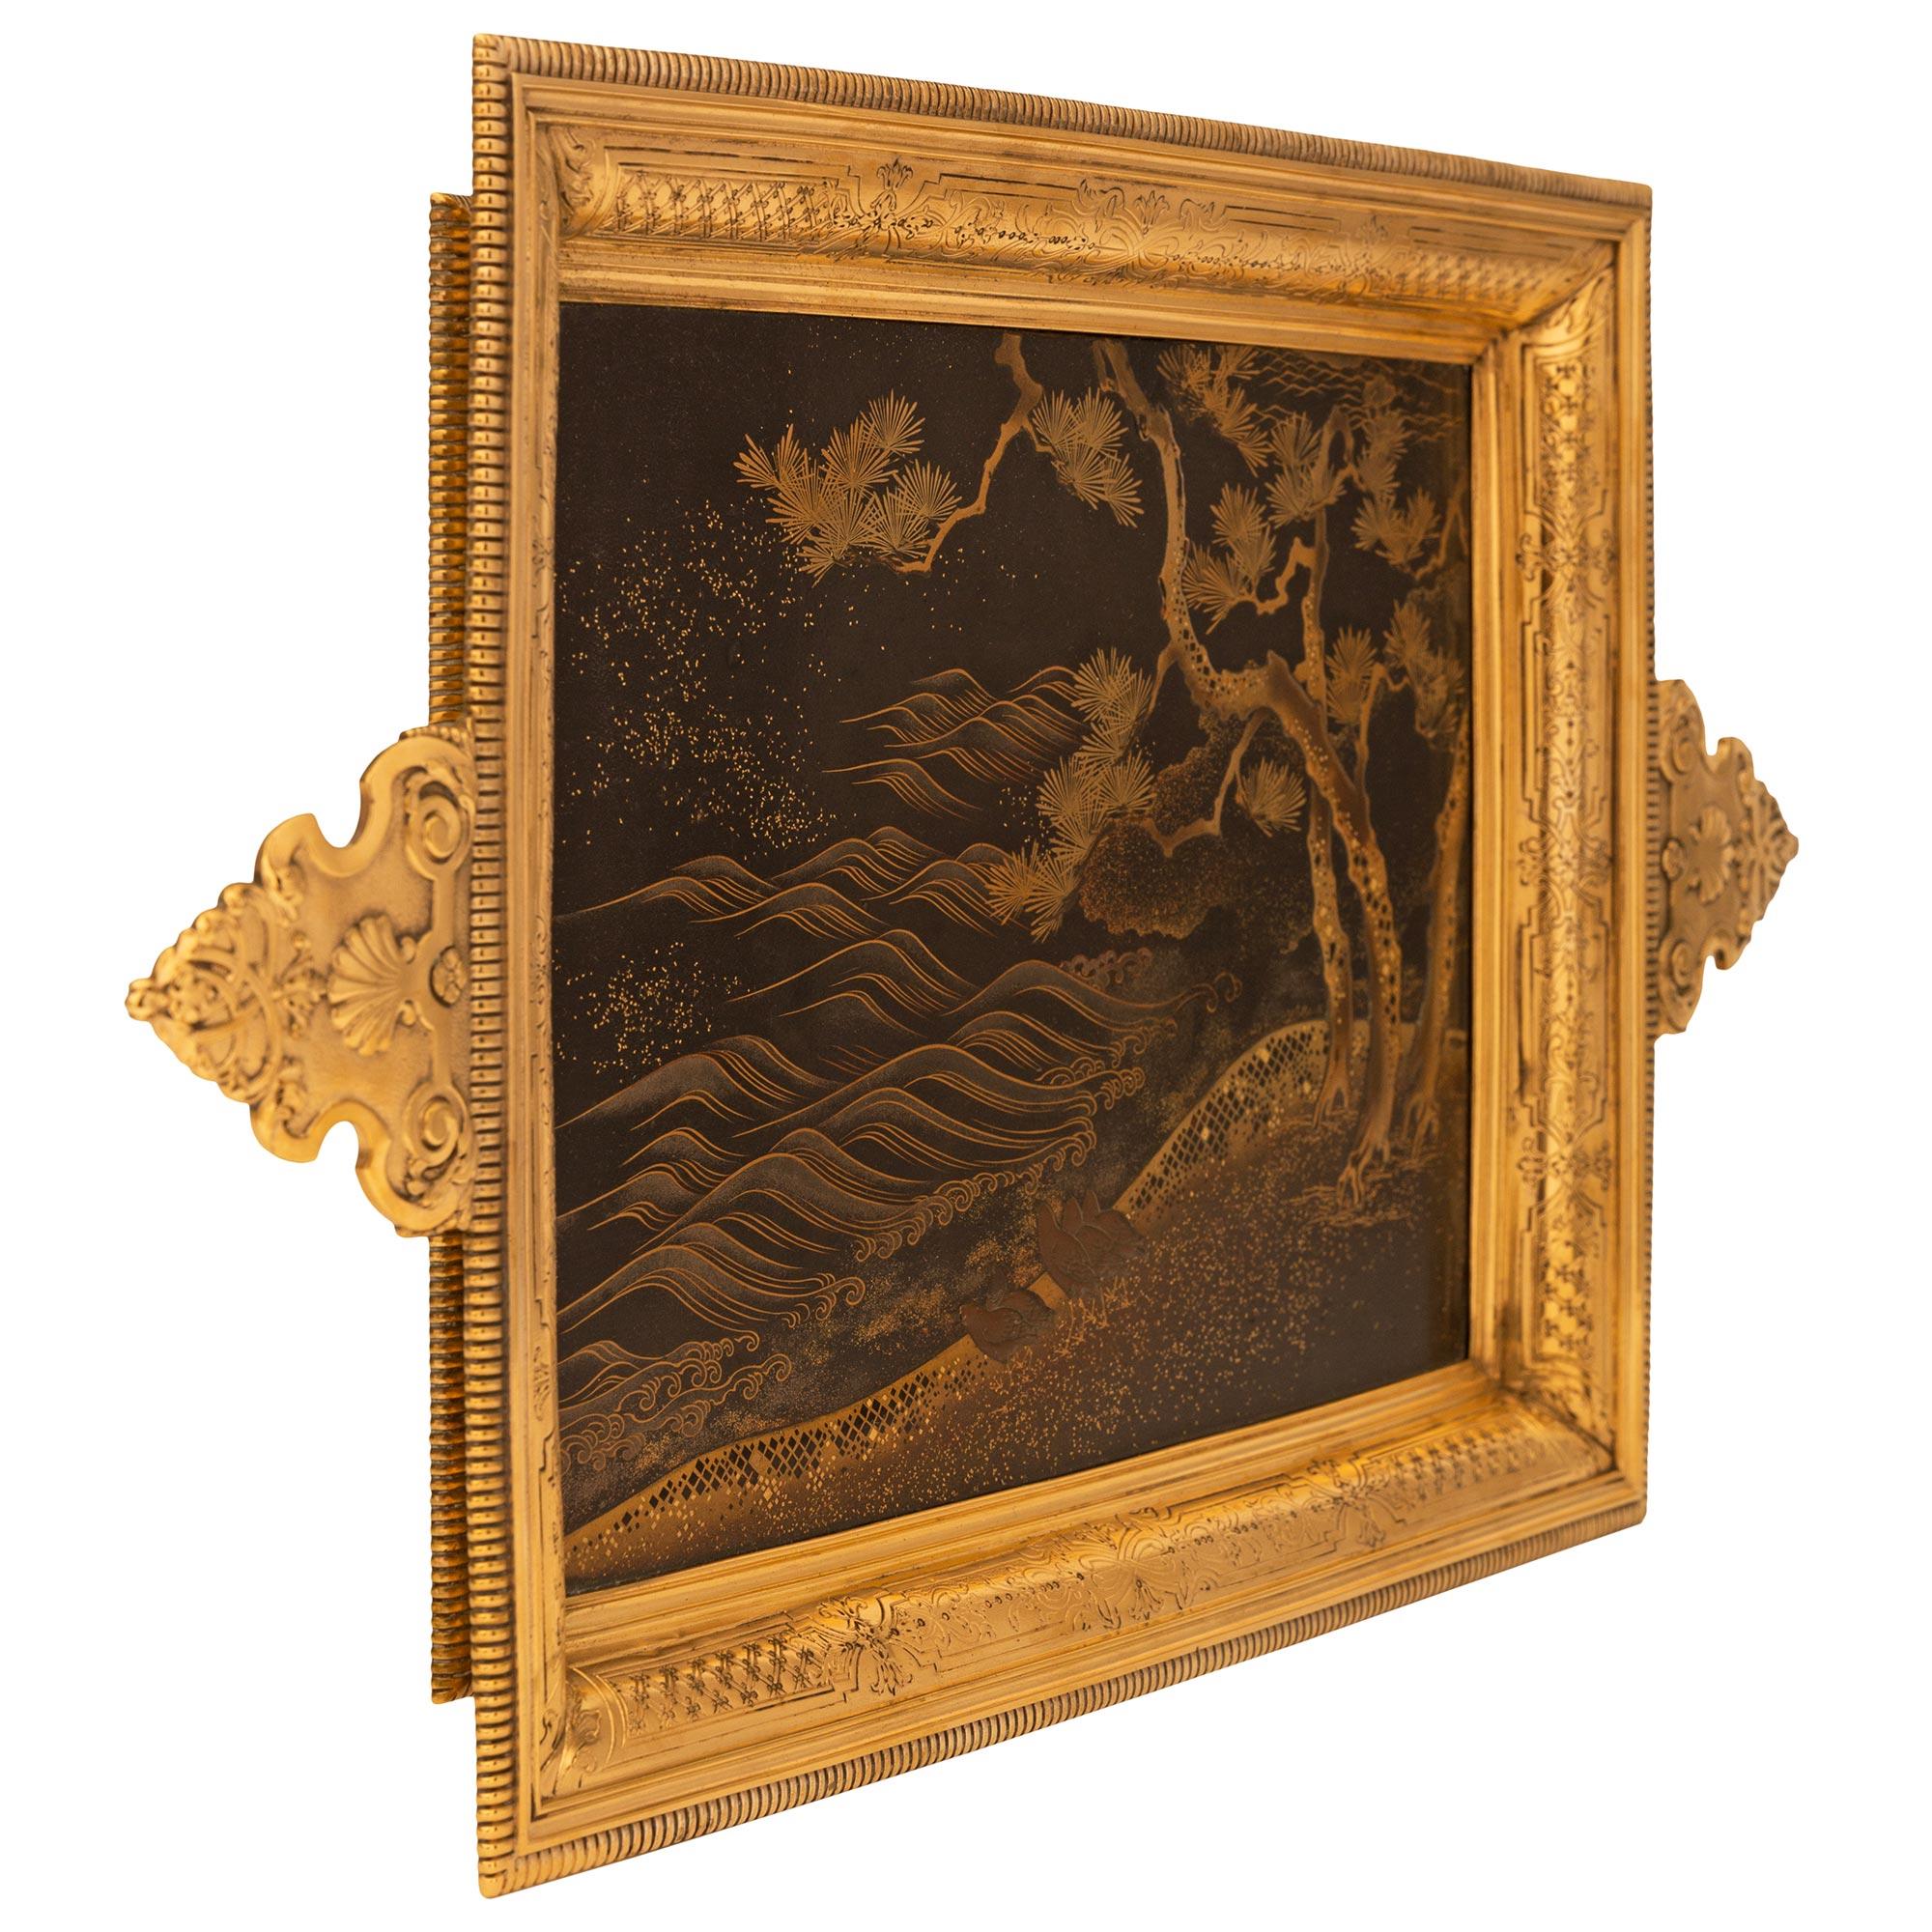 A very unique and highly detailed French 19th century Meiji period Japanese Lacquer and Ormolu Tray, stamped Bointaburet A Paris. This exquisite rectangular tray was fashioned with Japanese Lacquer and contains a central image of an elevated